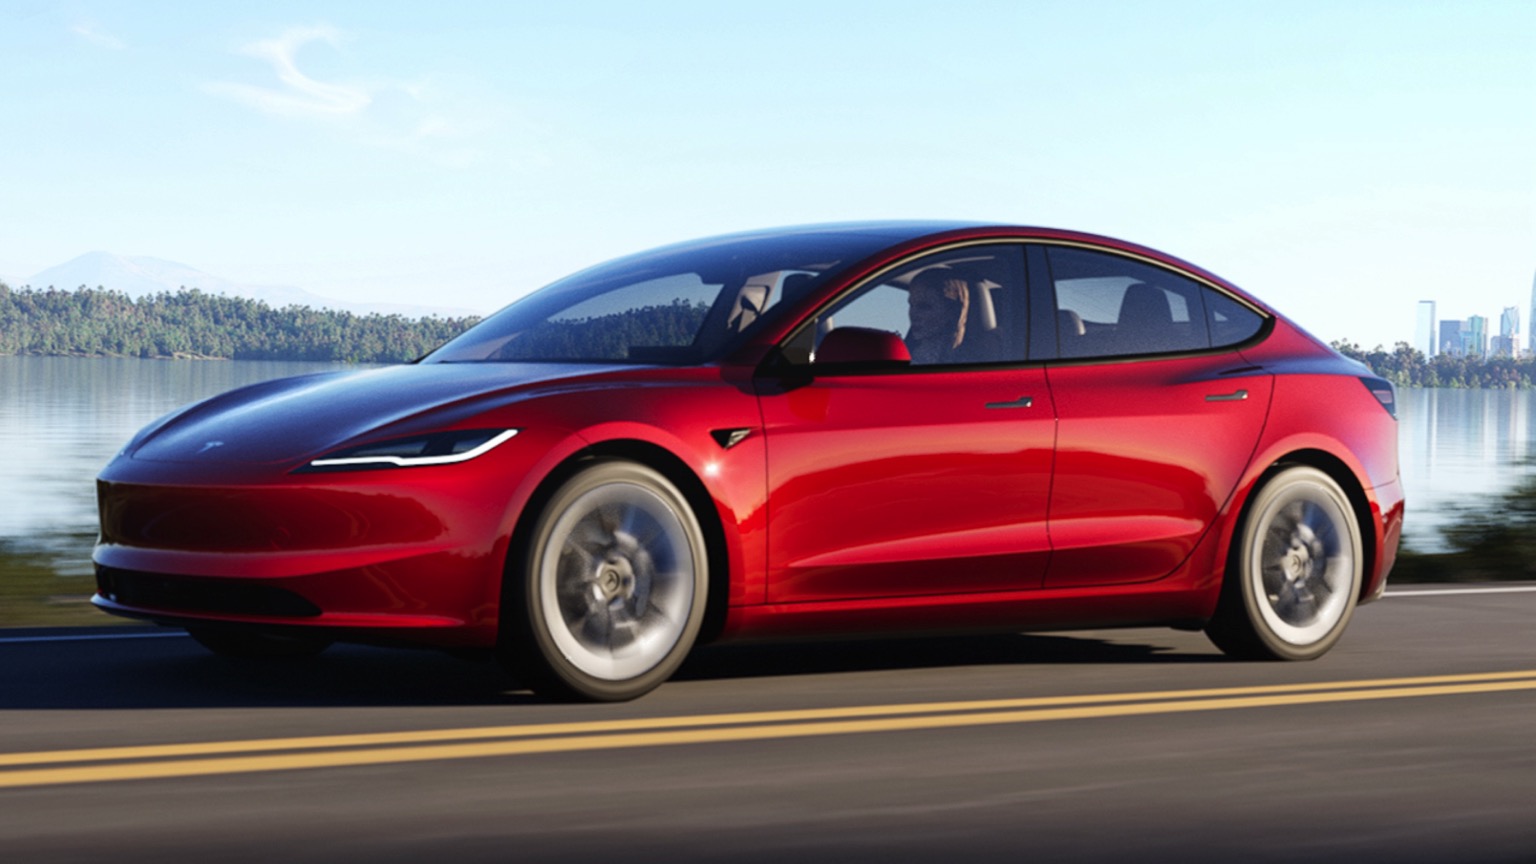 Tesla Shares Insights on the New Model 3 Performance's Design